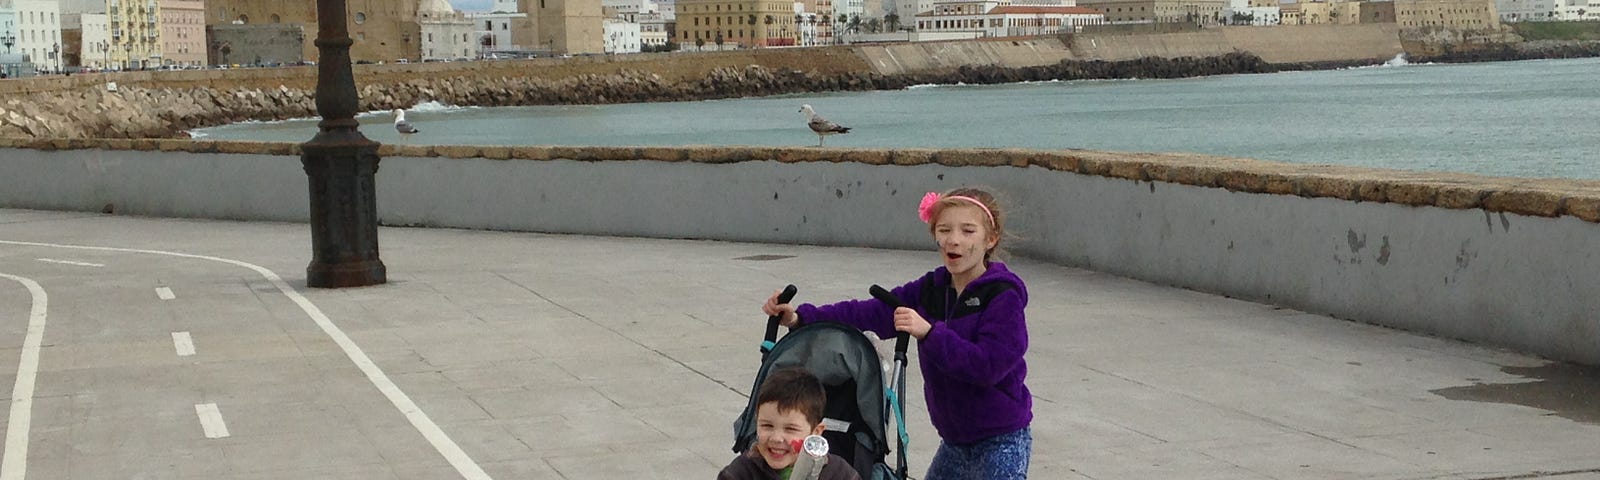 A young girl pushes her 5-year-old brother in a stroller in the waterfront area of Cadiz, Spain.